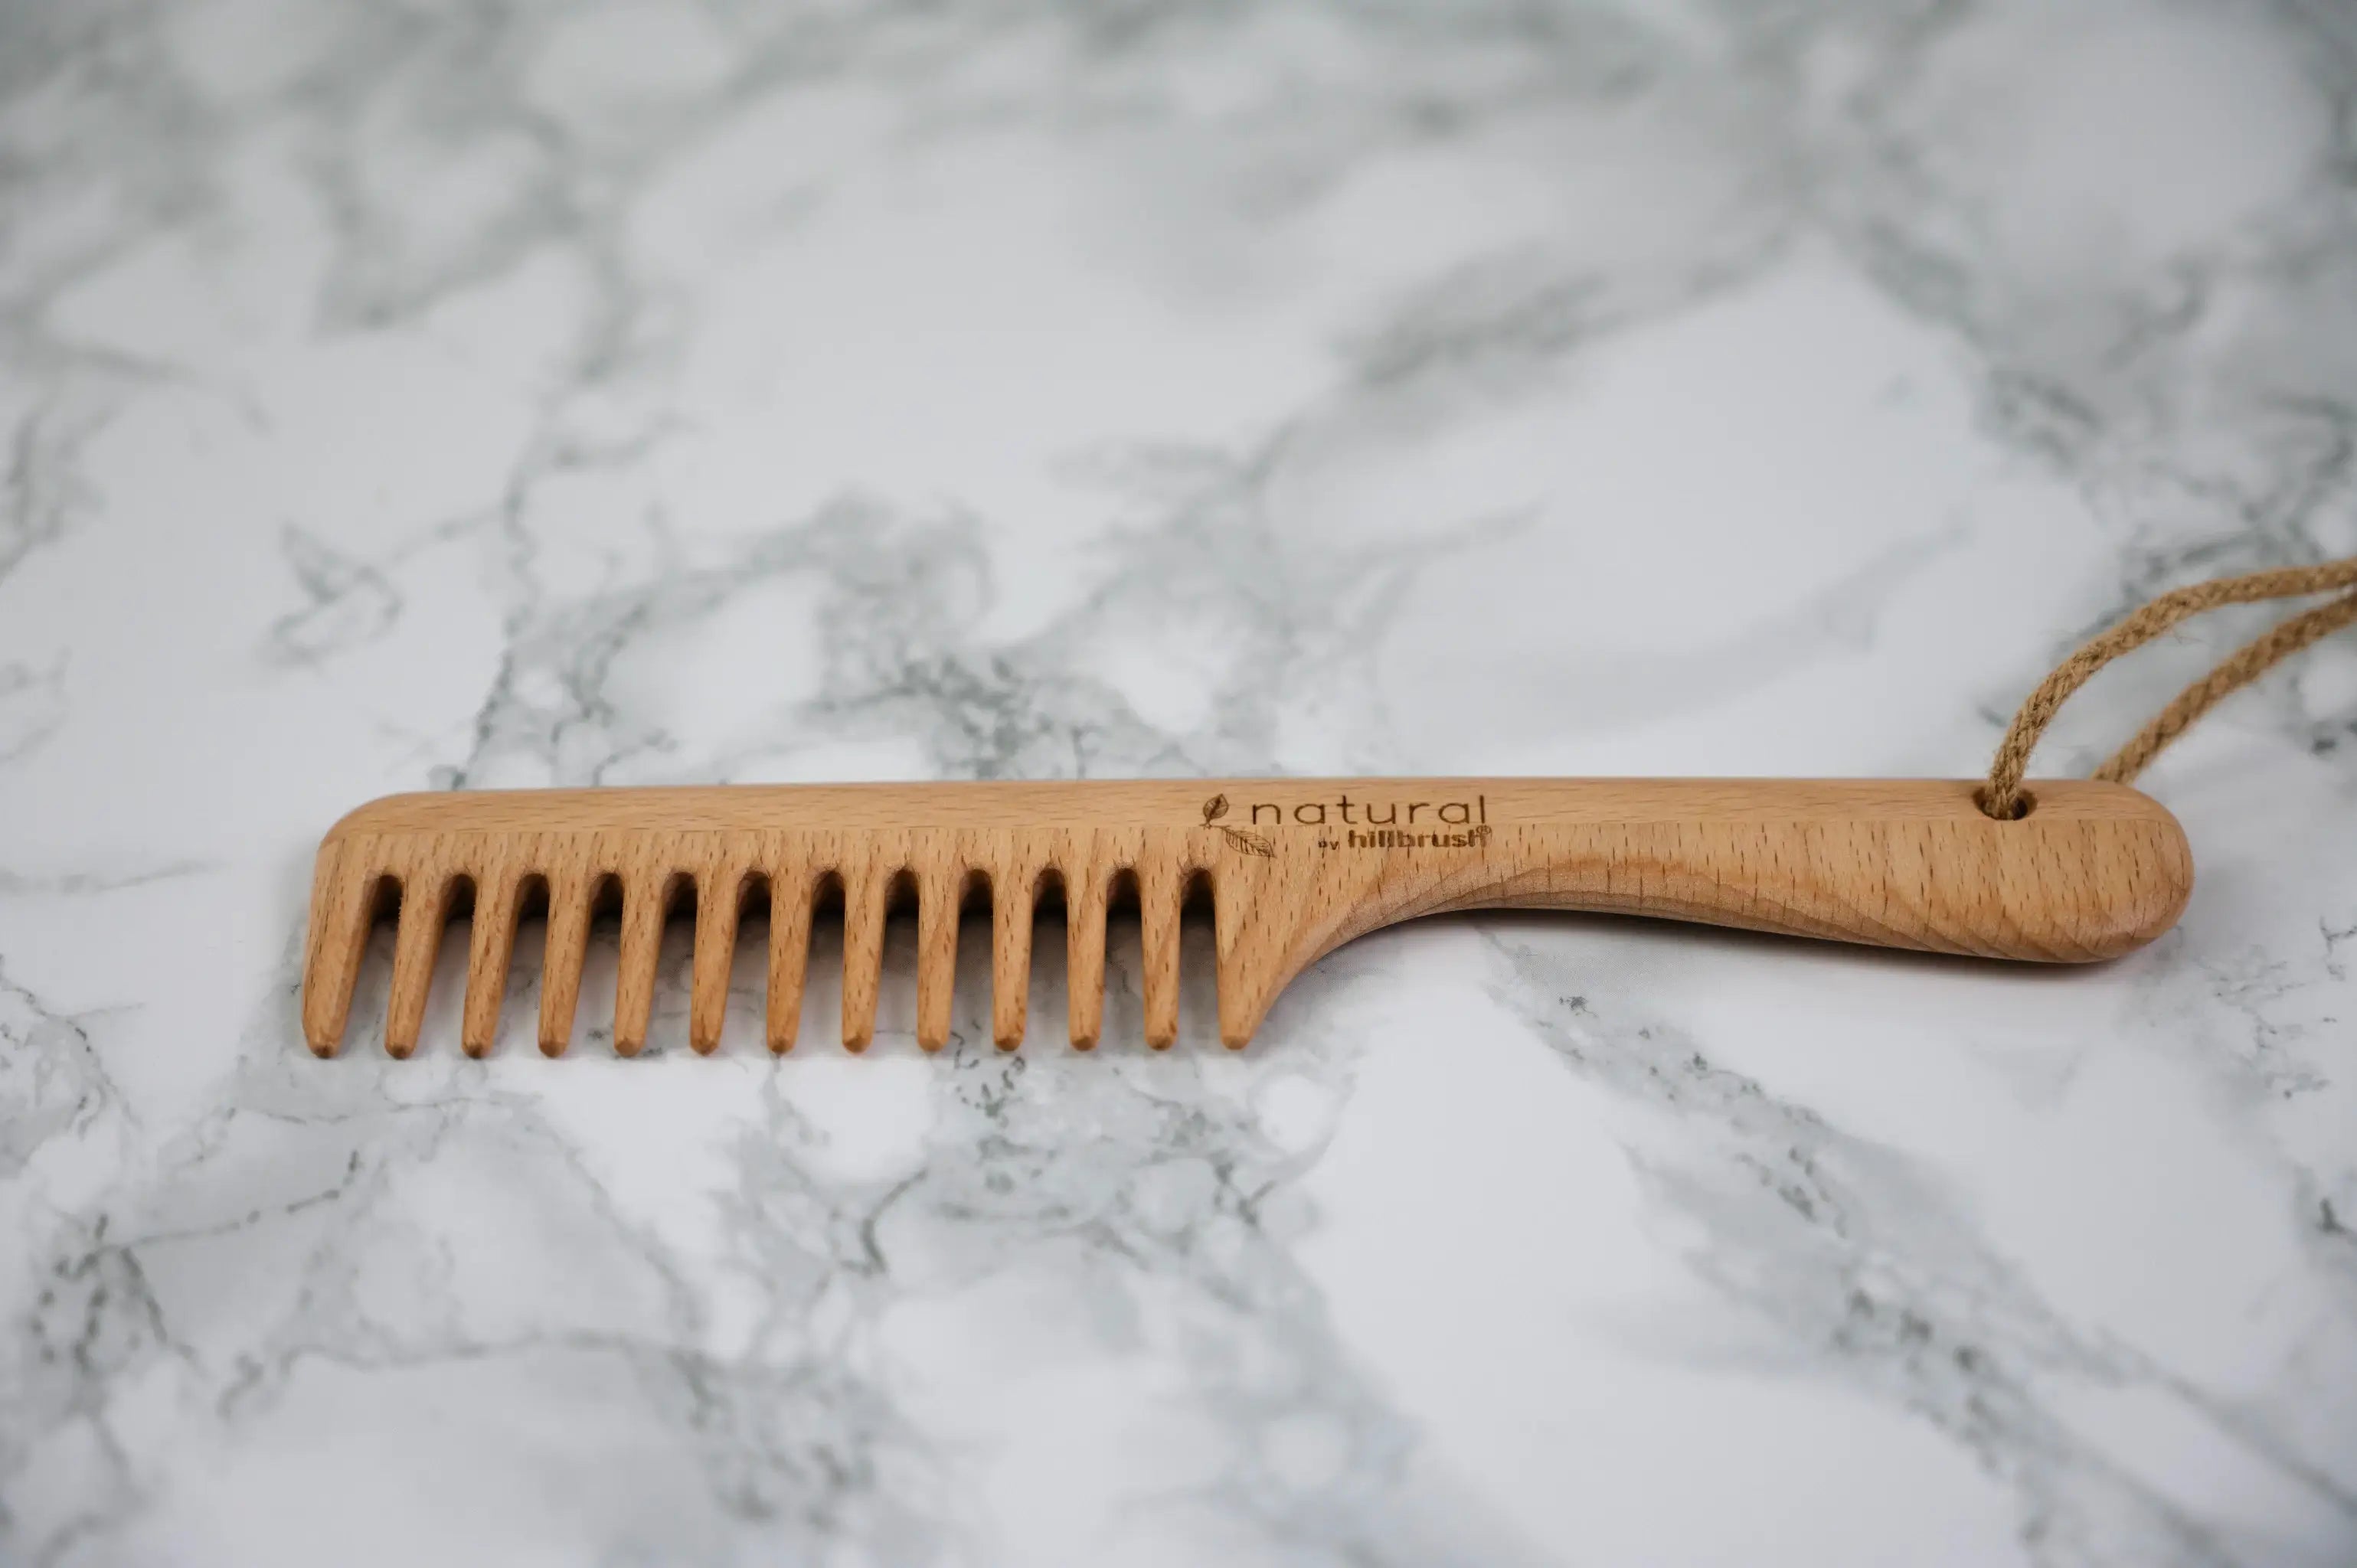 A wide toothed wooden comb with hanging loop lies flat on a marble surface. Product made by UK makers Hillbrush